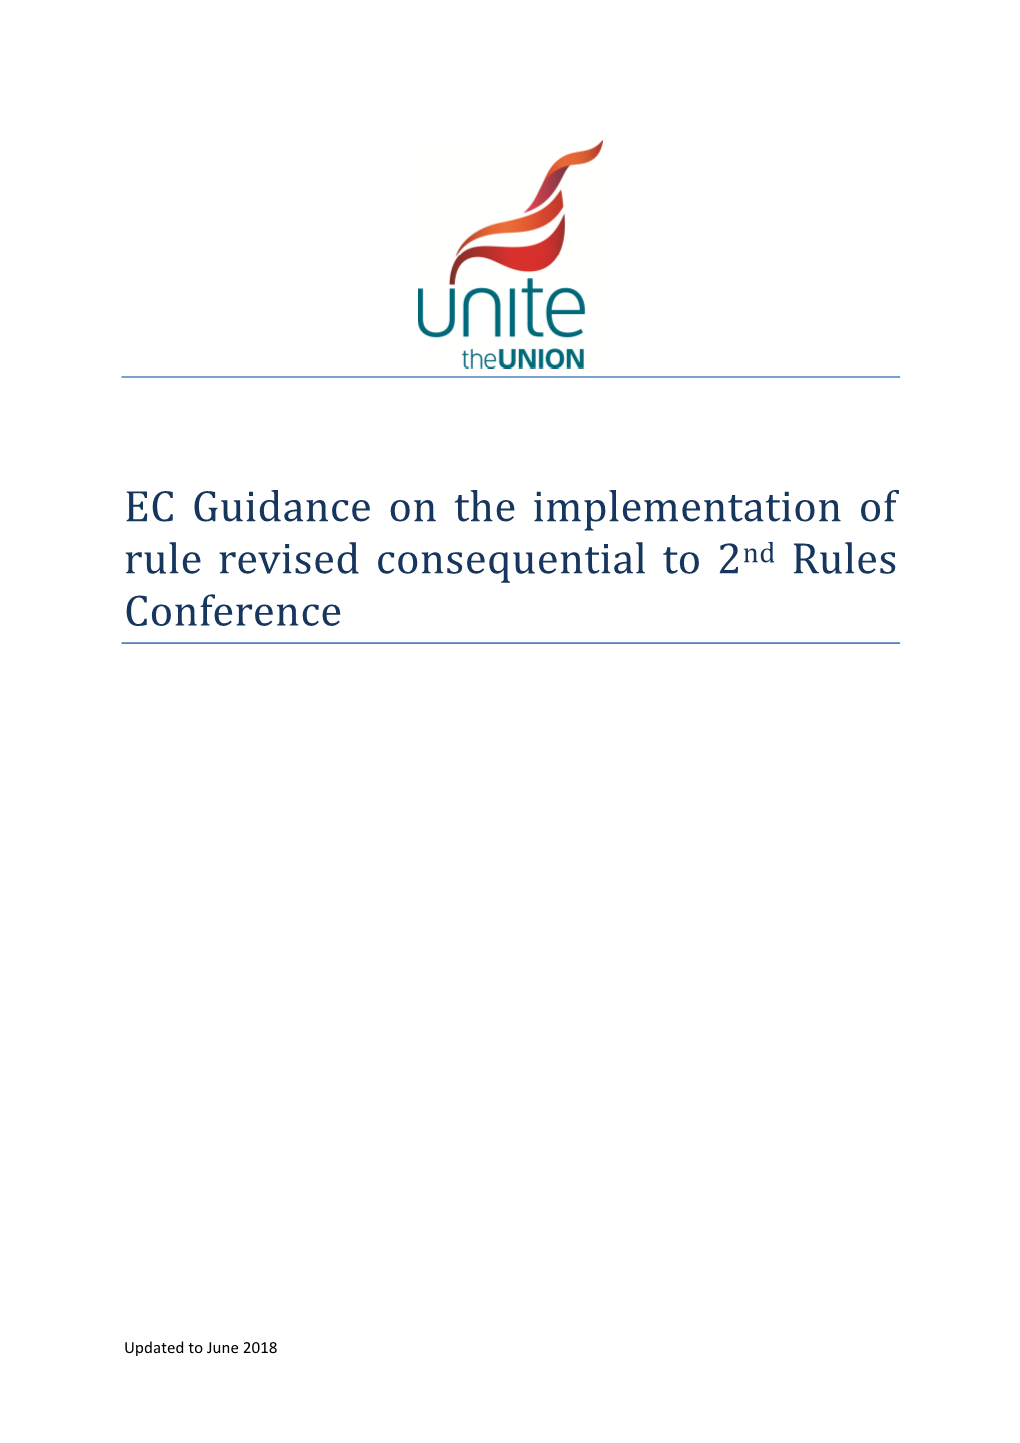 EC Guidance on the Implementation of Rule Revised Consequential to 2Nd